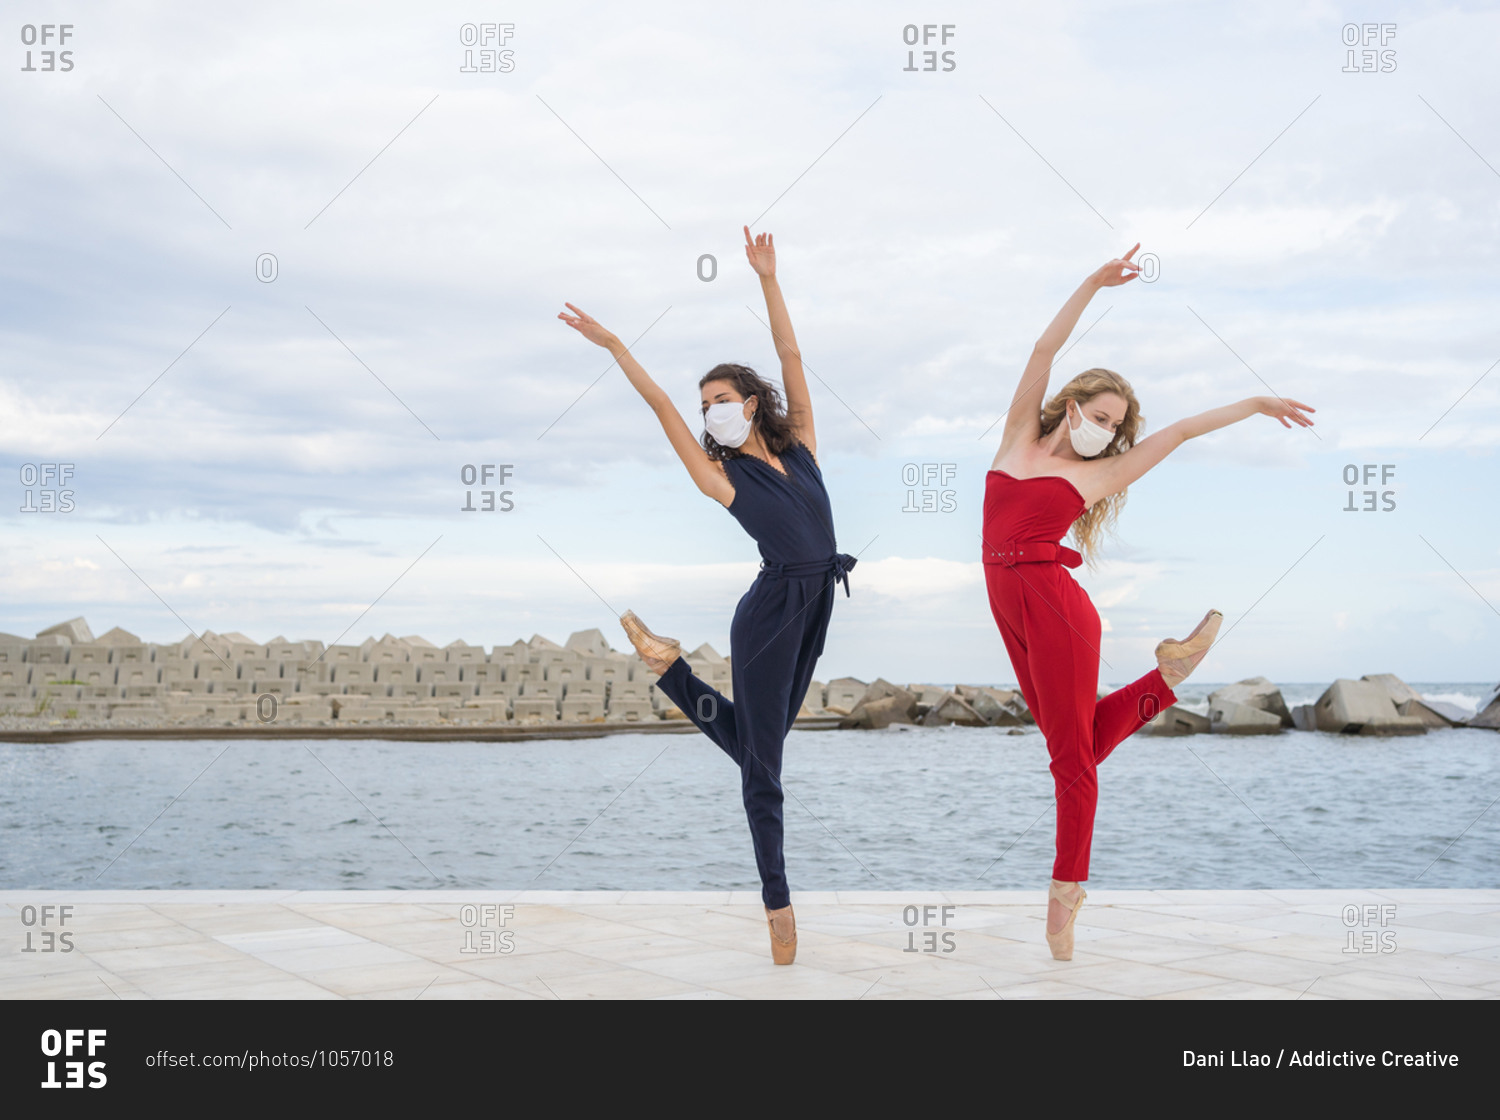 Full body of slim young women in colorful clothing standing on tiptoe and performing graceful dance on paved embankment against cloudy sky